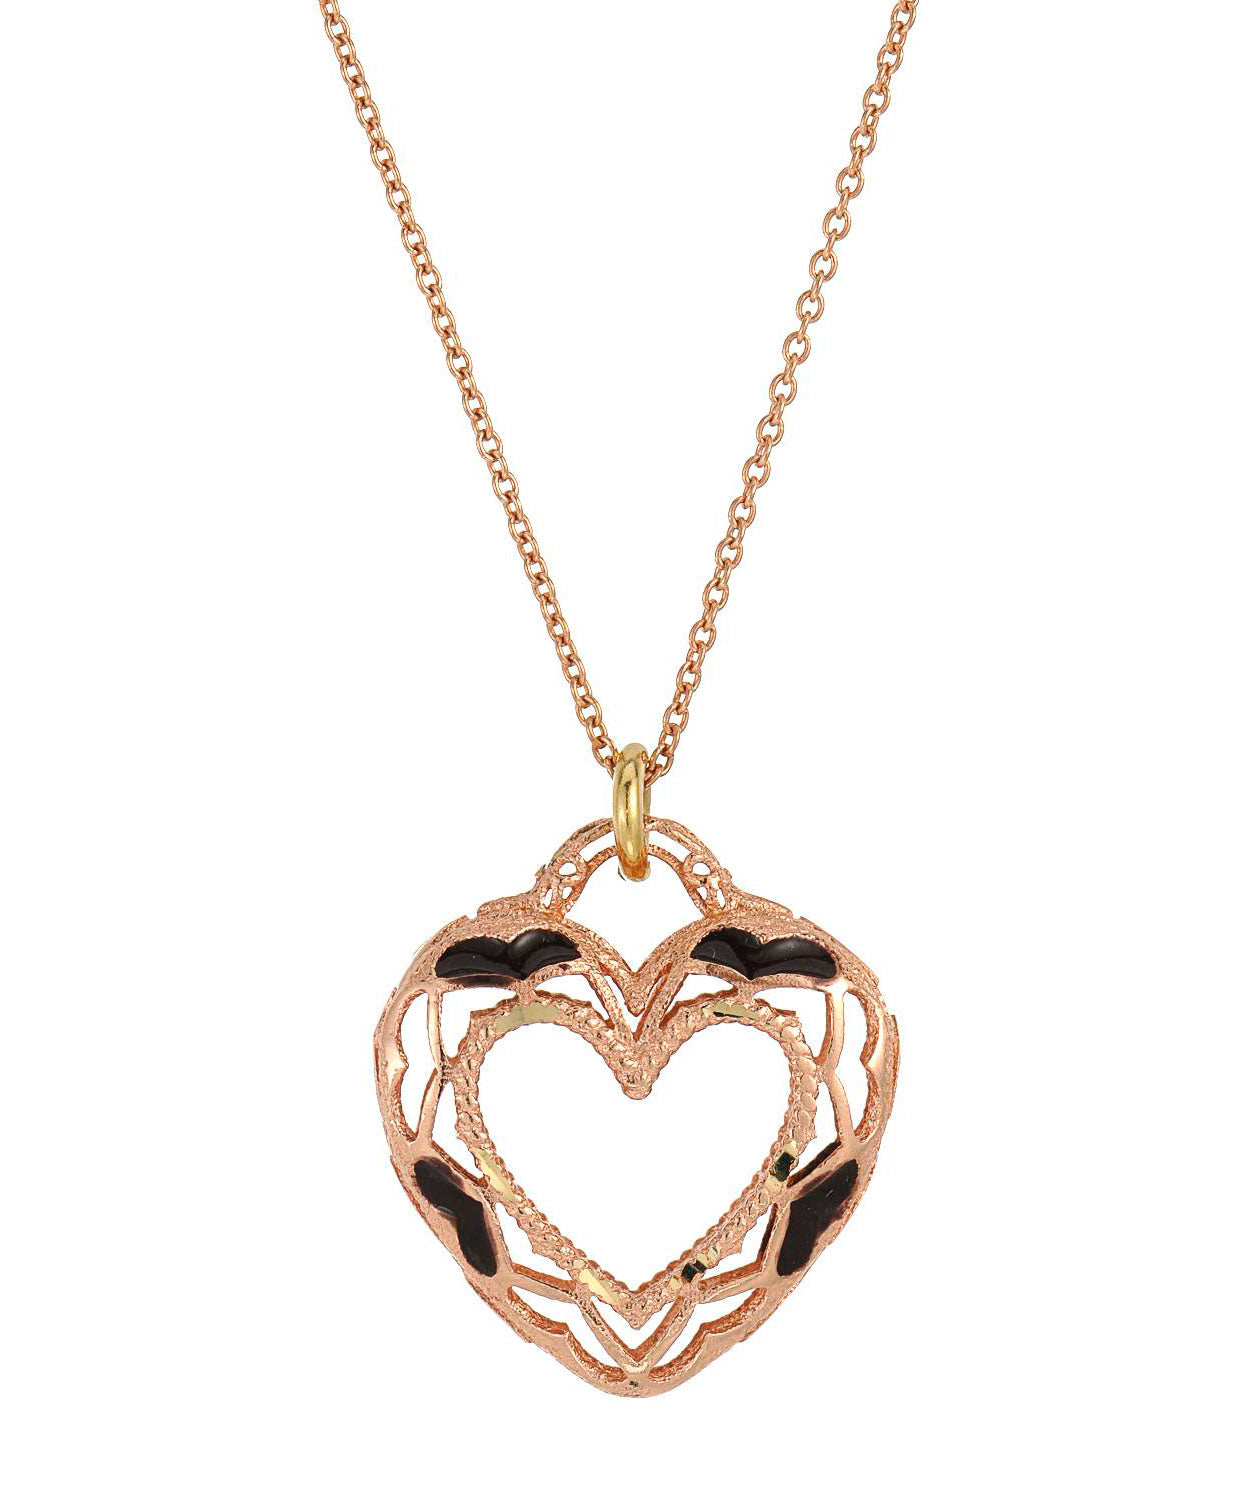 14k Rose Gold & Black Enamel Heart Pendant With Chain View 1